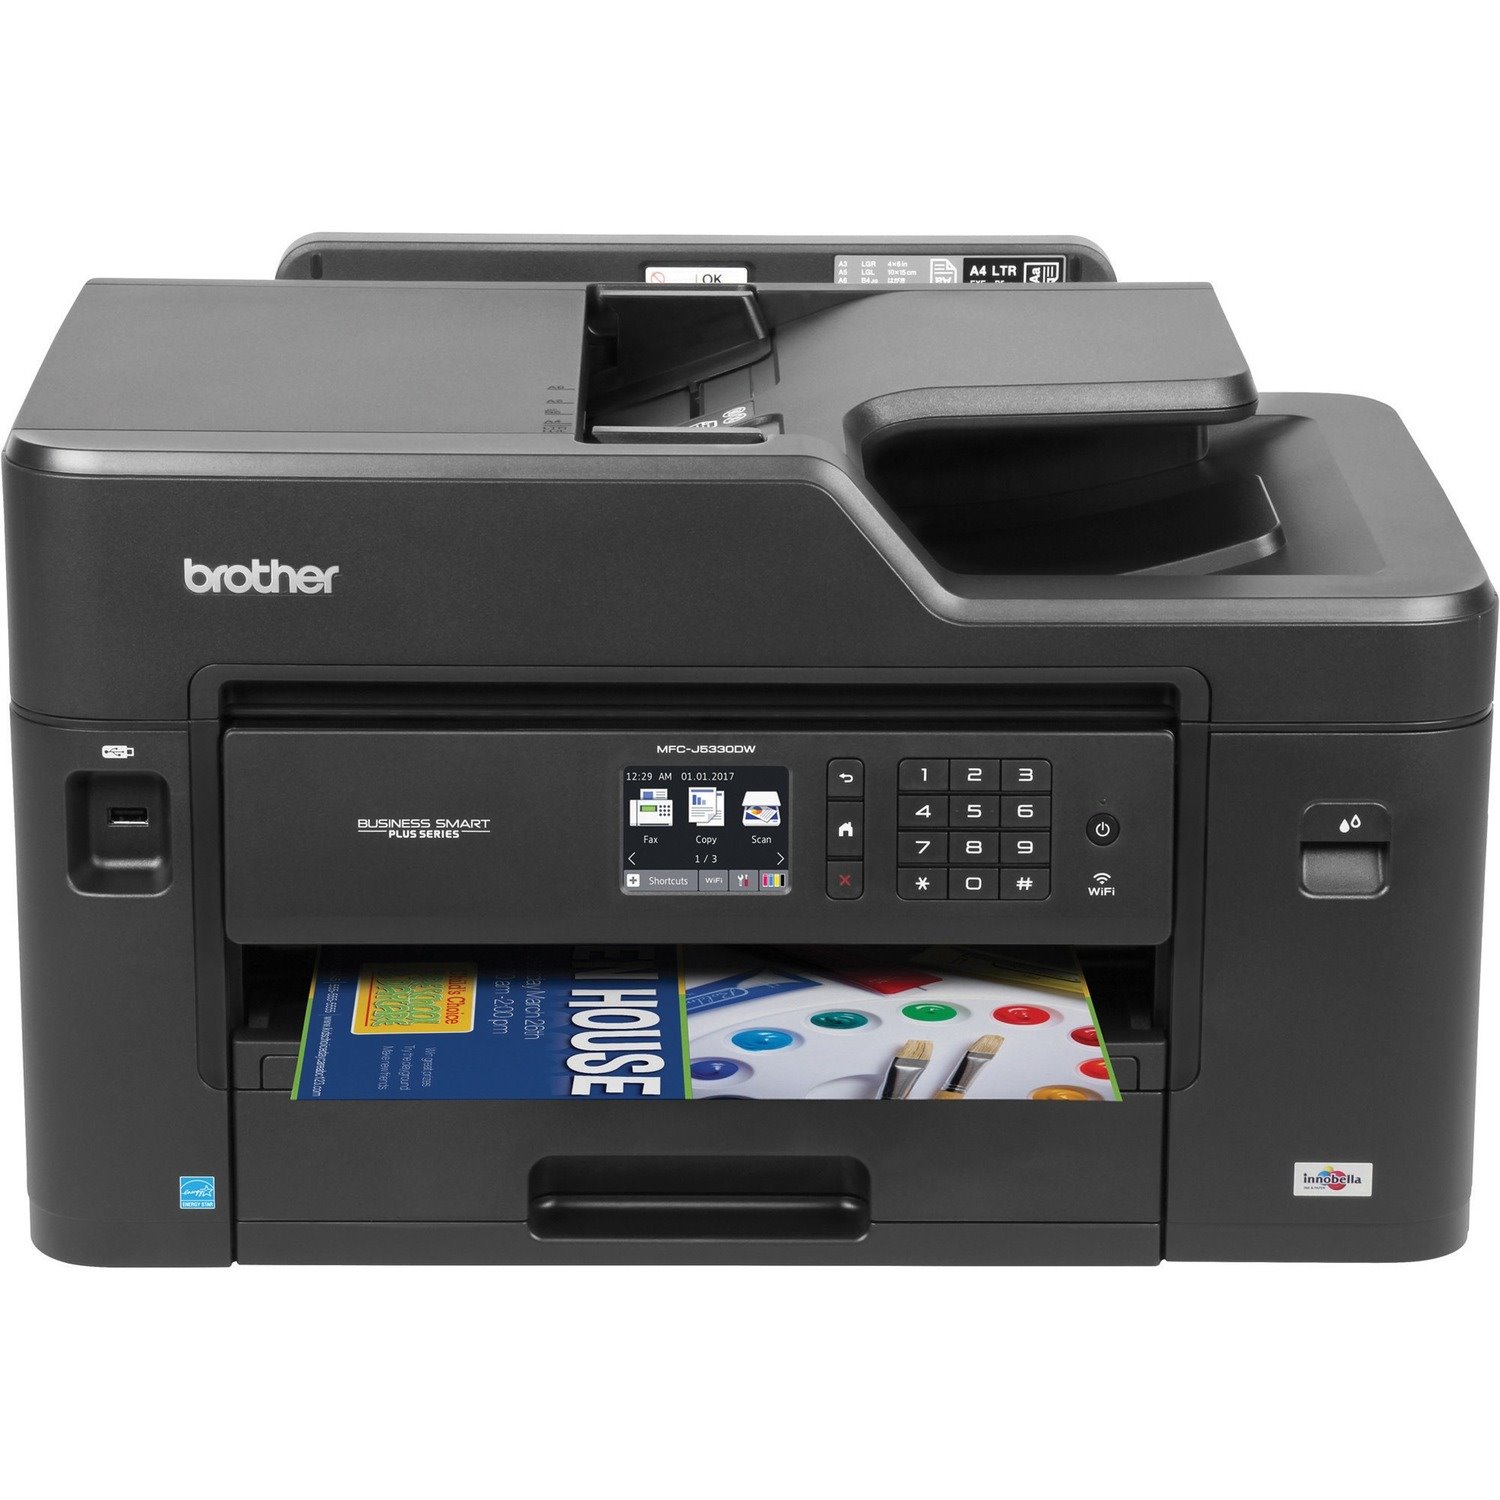 Brother MFC-J5330DW All-in-One Color Inkjet Printer, Wireless Connectivity, Automatic Duplex Printing, Amazon Dash Replenishment Ready